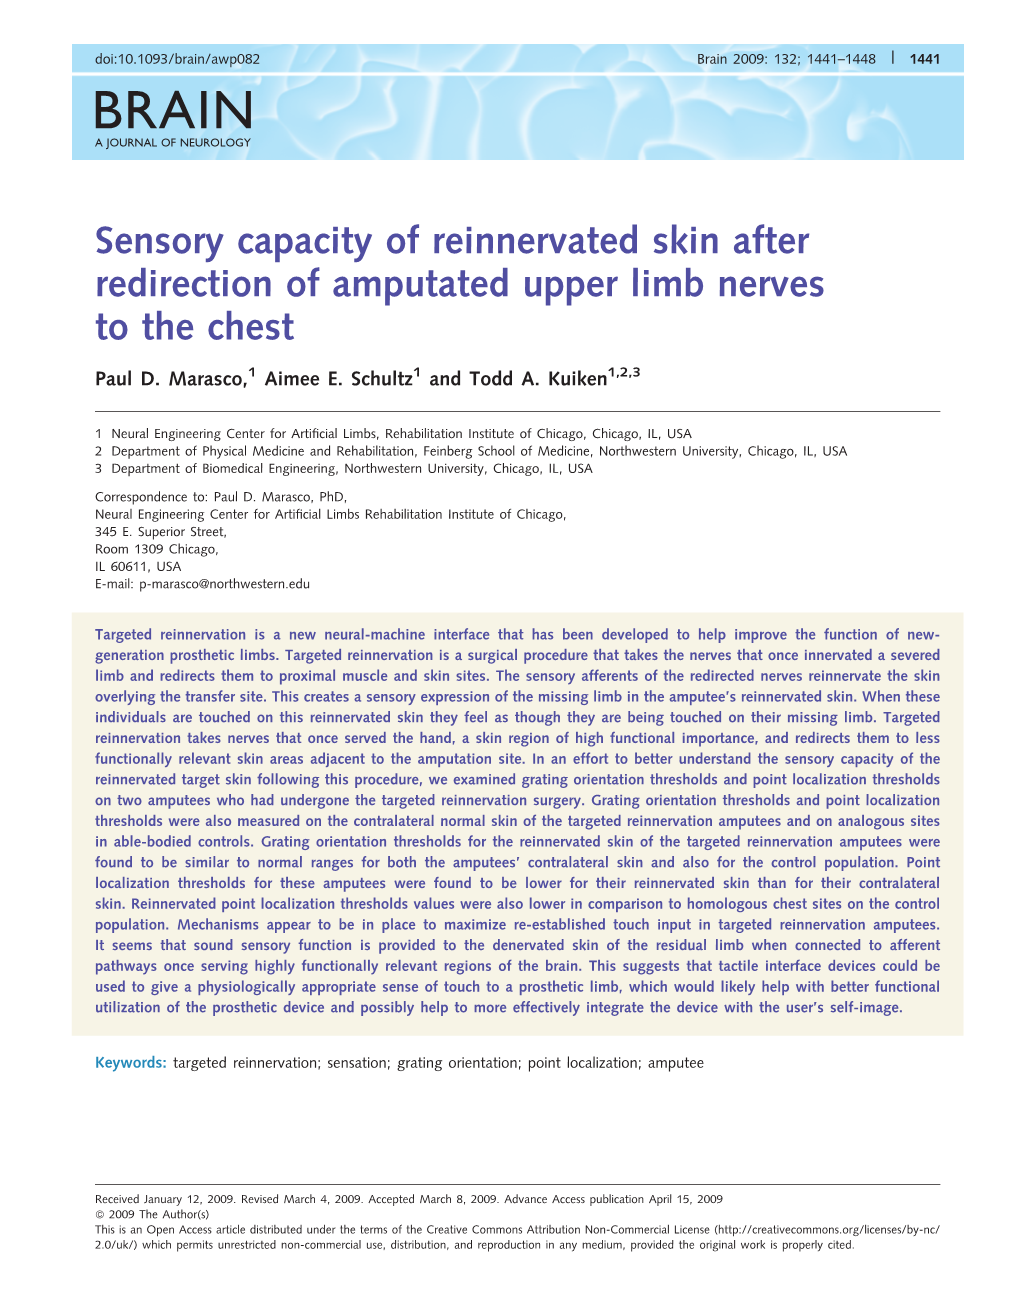 Sensory Capacity of Reinnervated Skin After Redirection of Amputated Upper Limb Nerves to the Chest